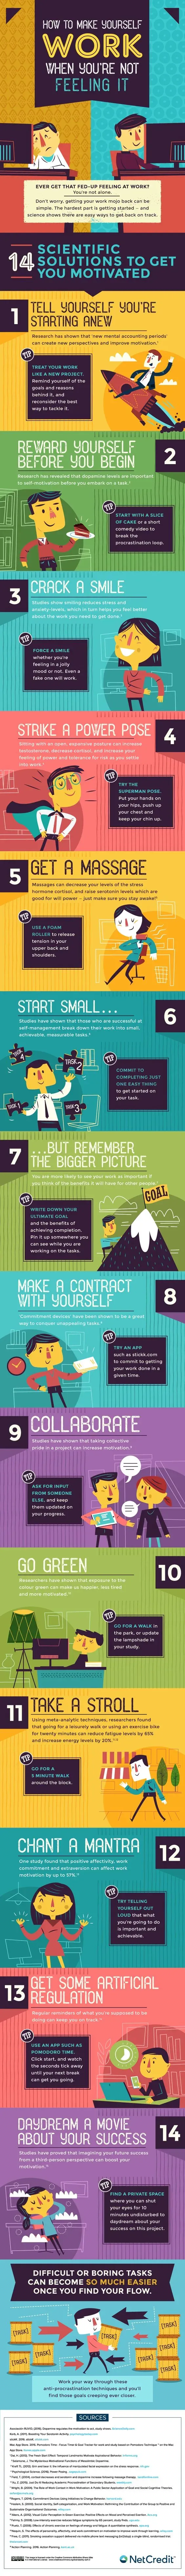 How to Make Yourself Work When You’re Not Feeling It #Infographic: 